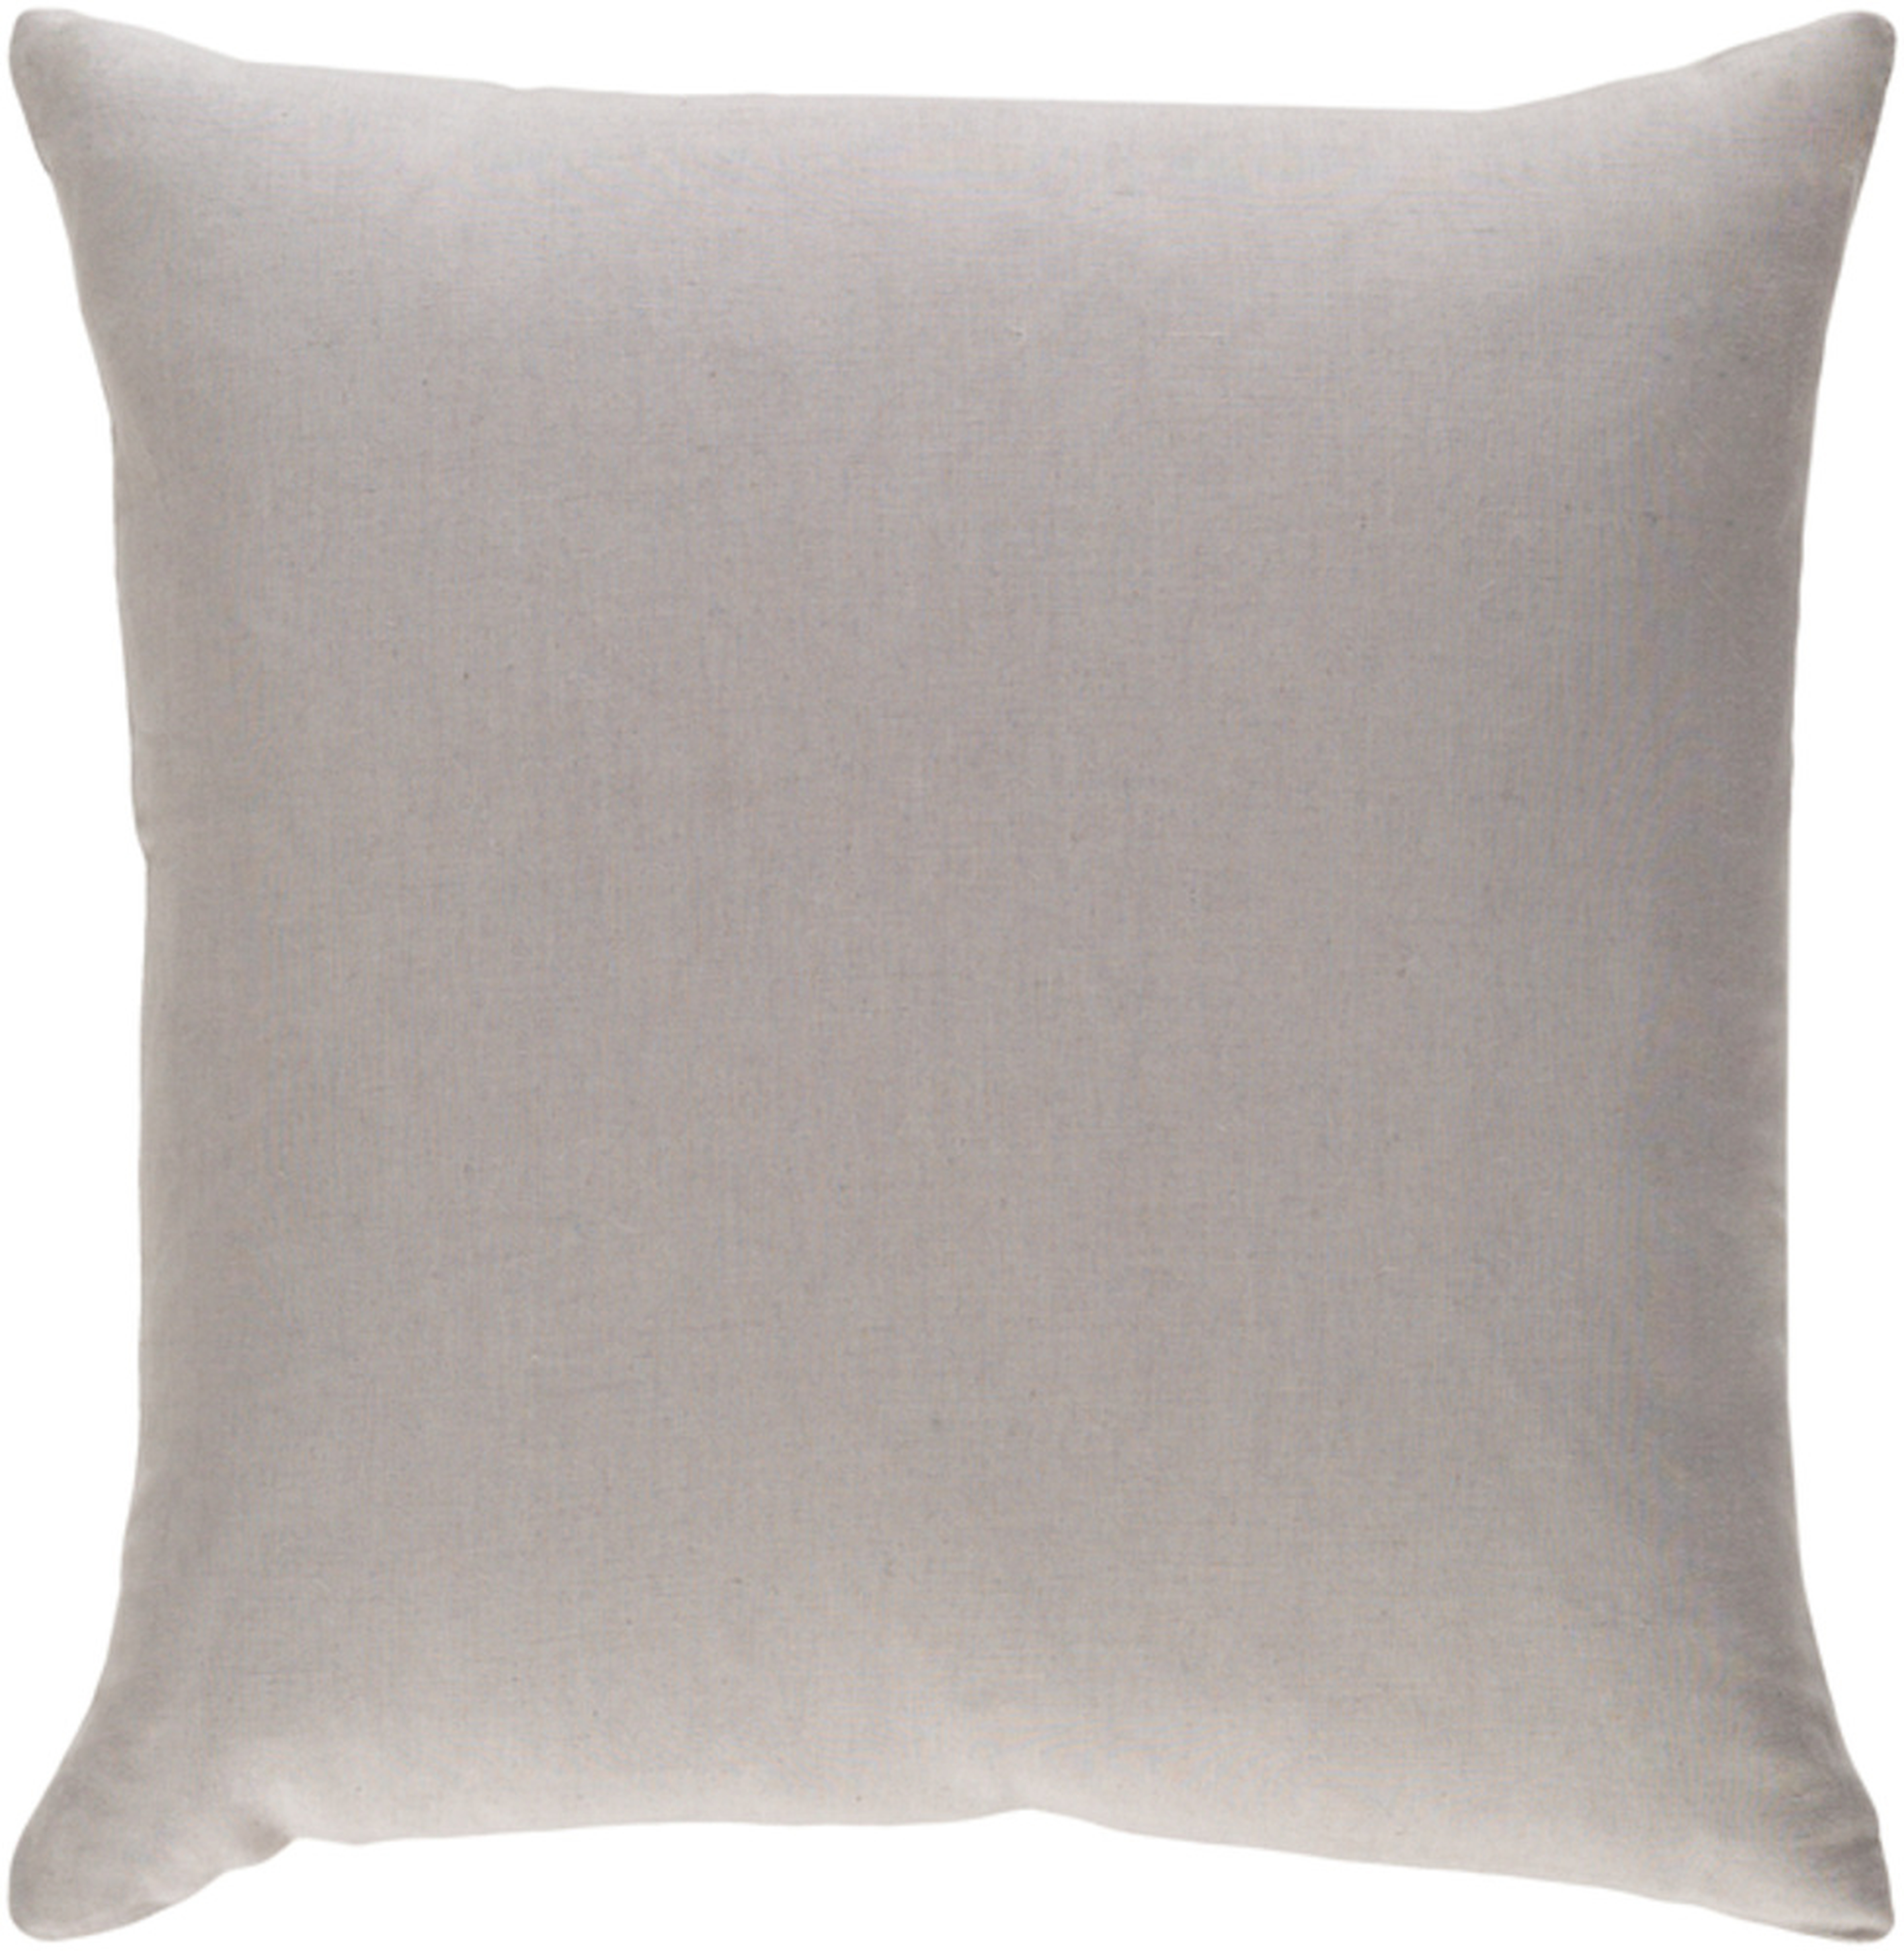 Ethiopia - ETPA-7209 - 18" x 18" - pillow cover only - Neva Home